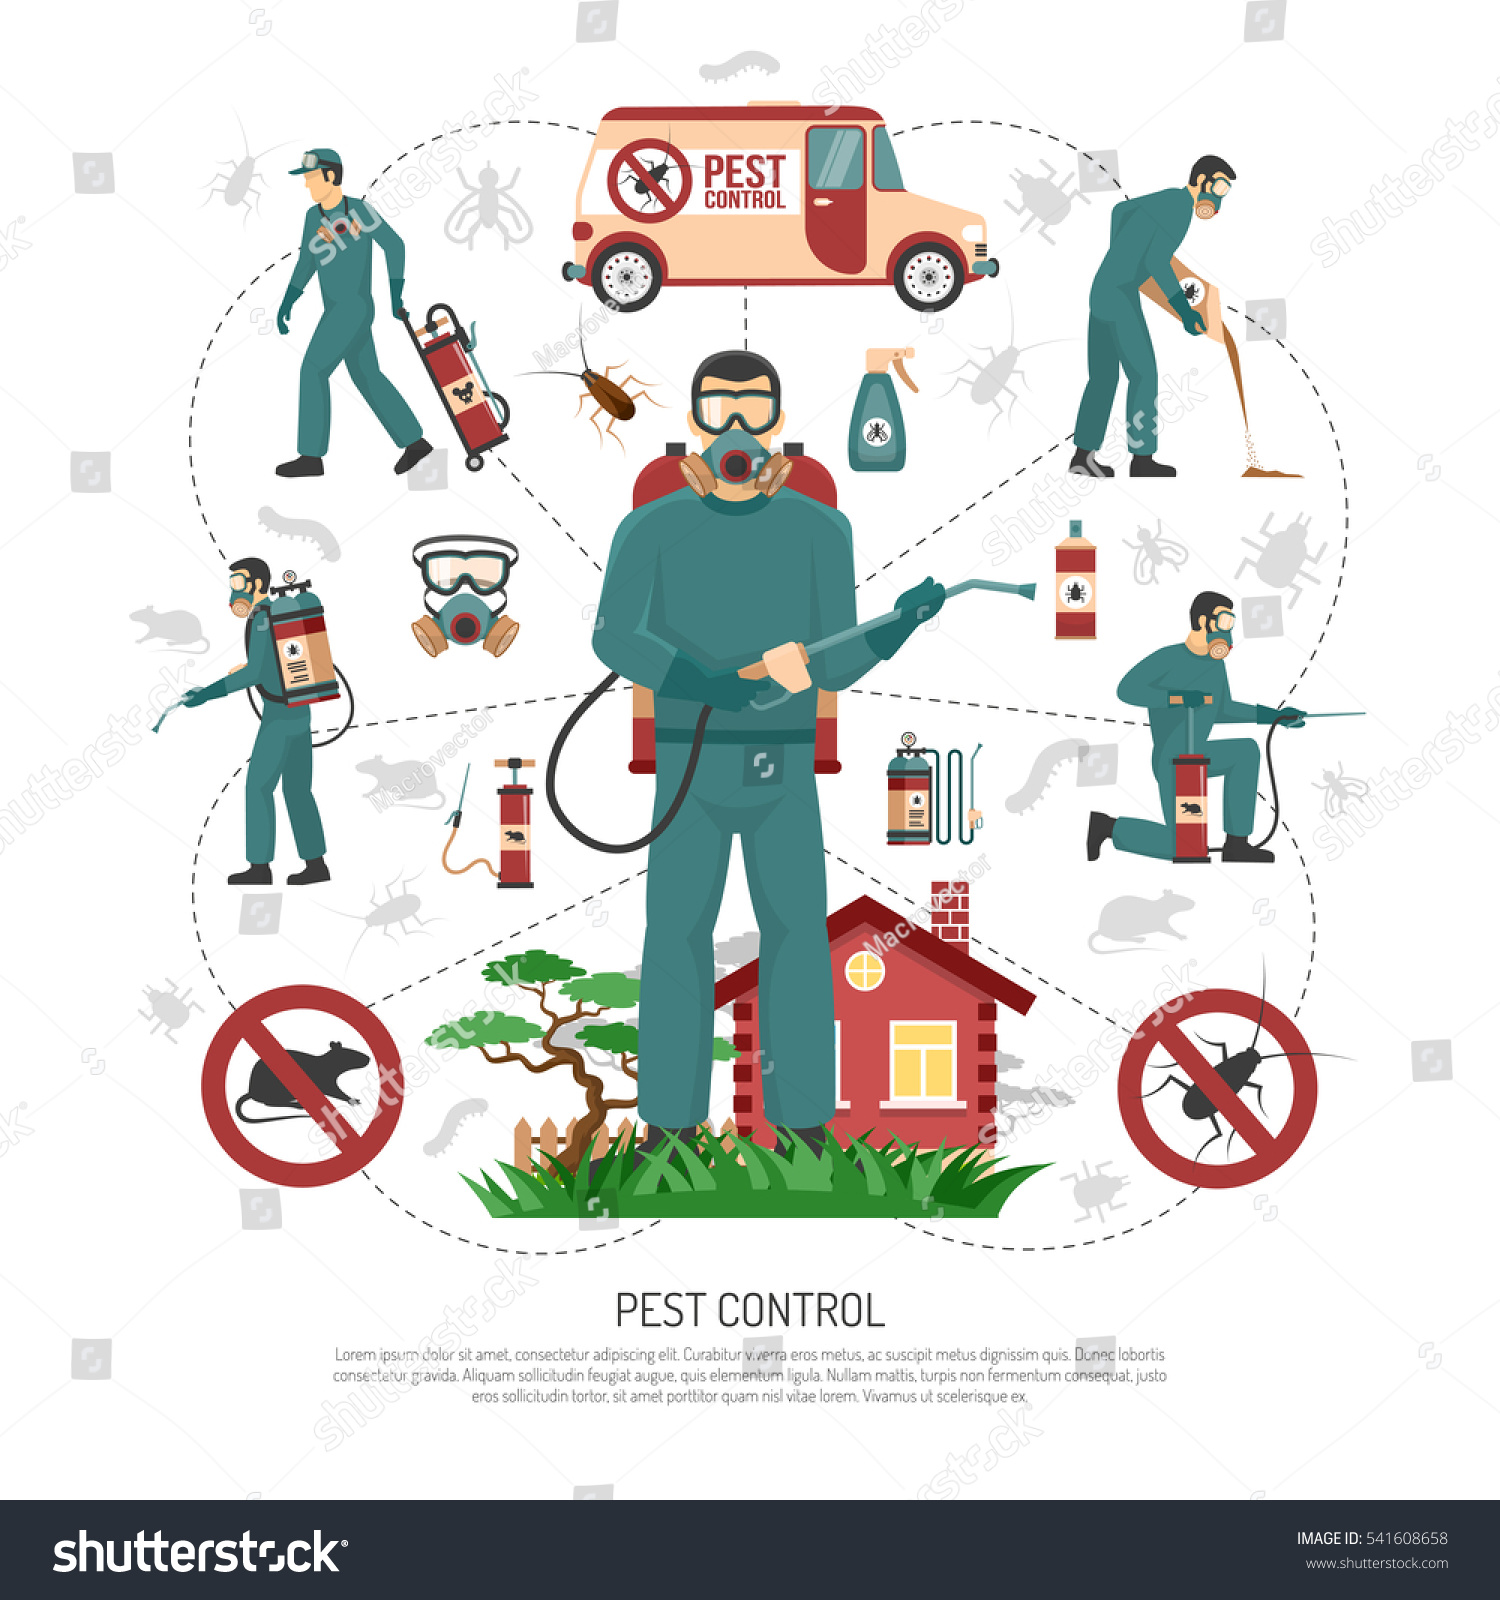 Professional pest control services experts handling all aspects of pest removal flat infographic advertisement poster vector illustration 